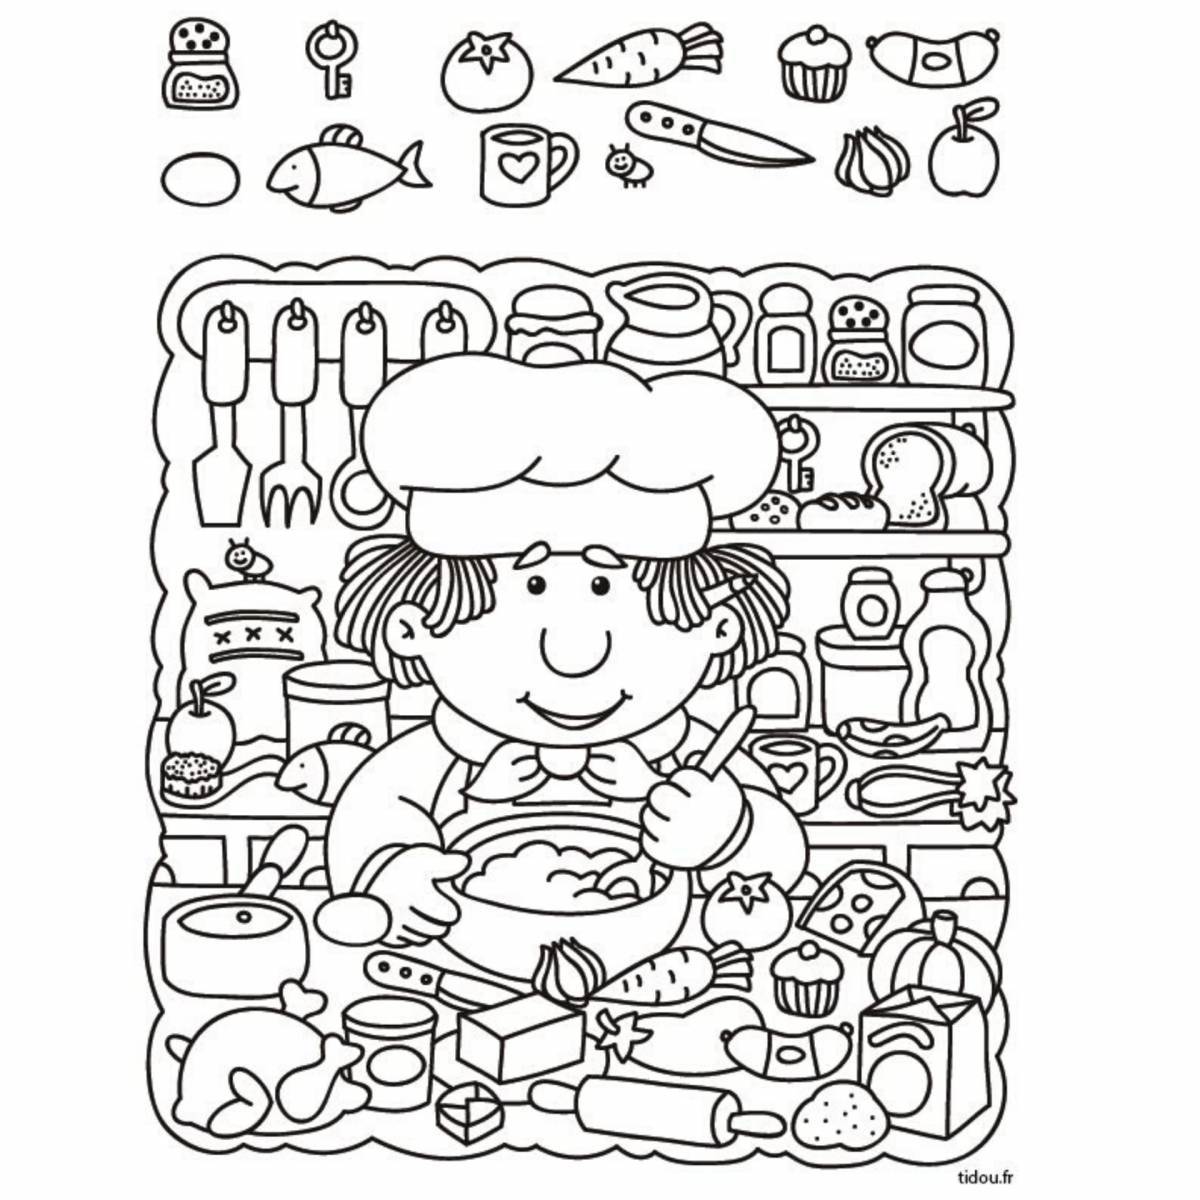 Exciting coloring pages to search for pages